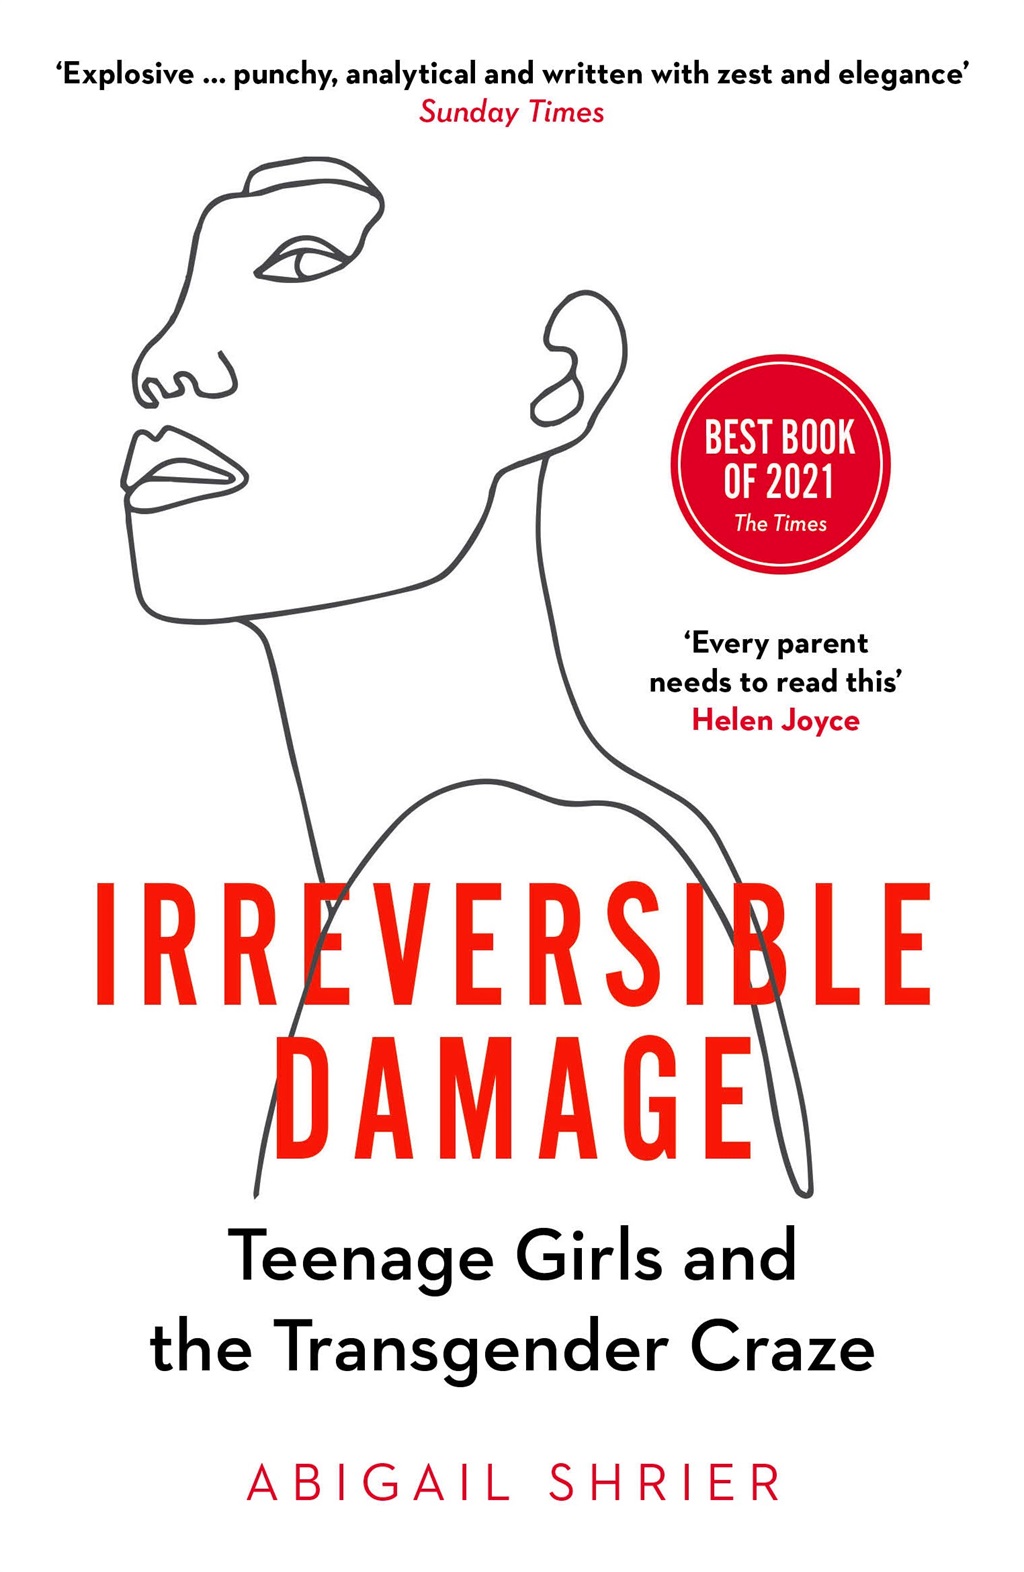 The cover of 'Irreversible Damage' 